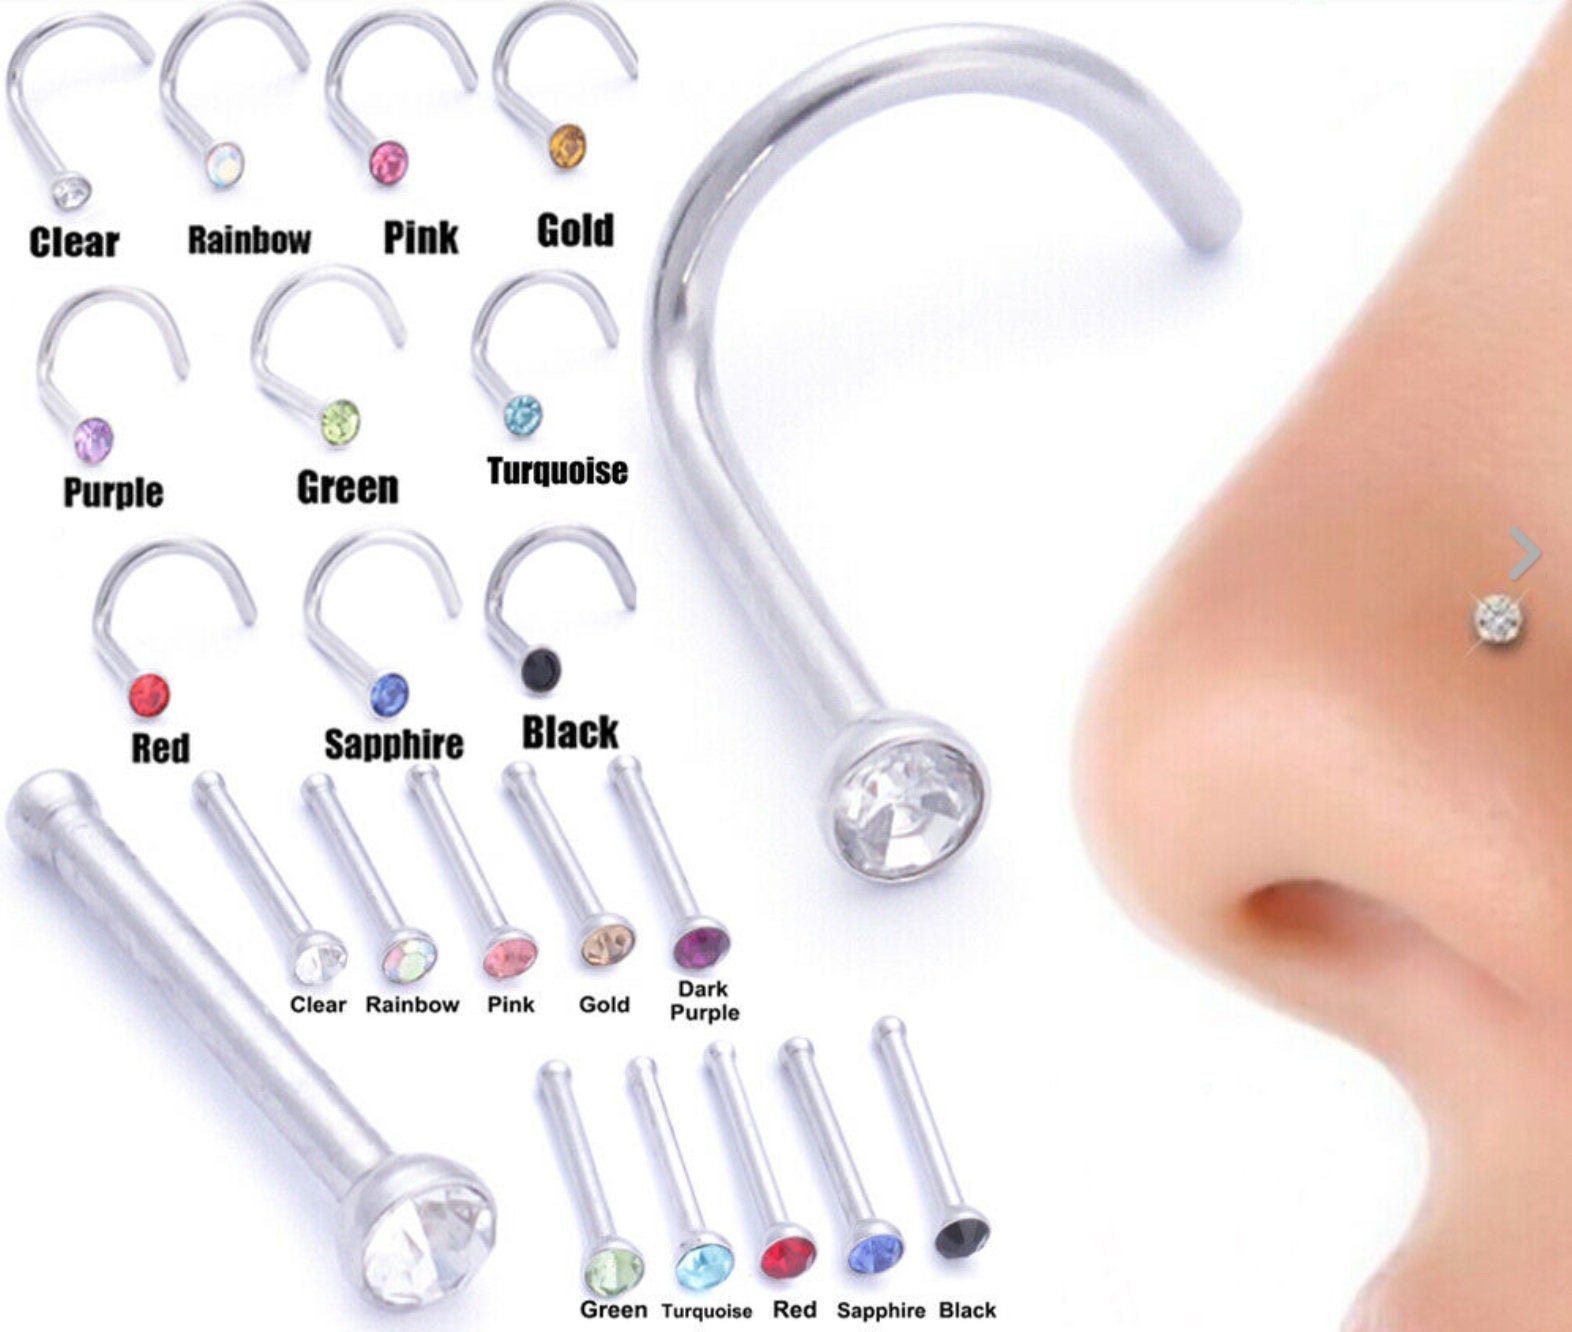 LL&TIFNIY 316L Surgical Steel Nose Ring Nostril Piercing Septum Jewelry Seamless Clicker Hoop for Hypoallergenic 20G 18G 16G 6mm-14mm Body Piercing for Women/Men 